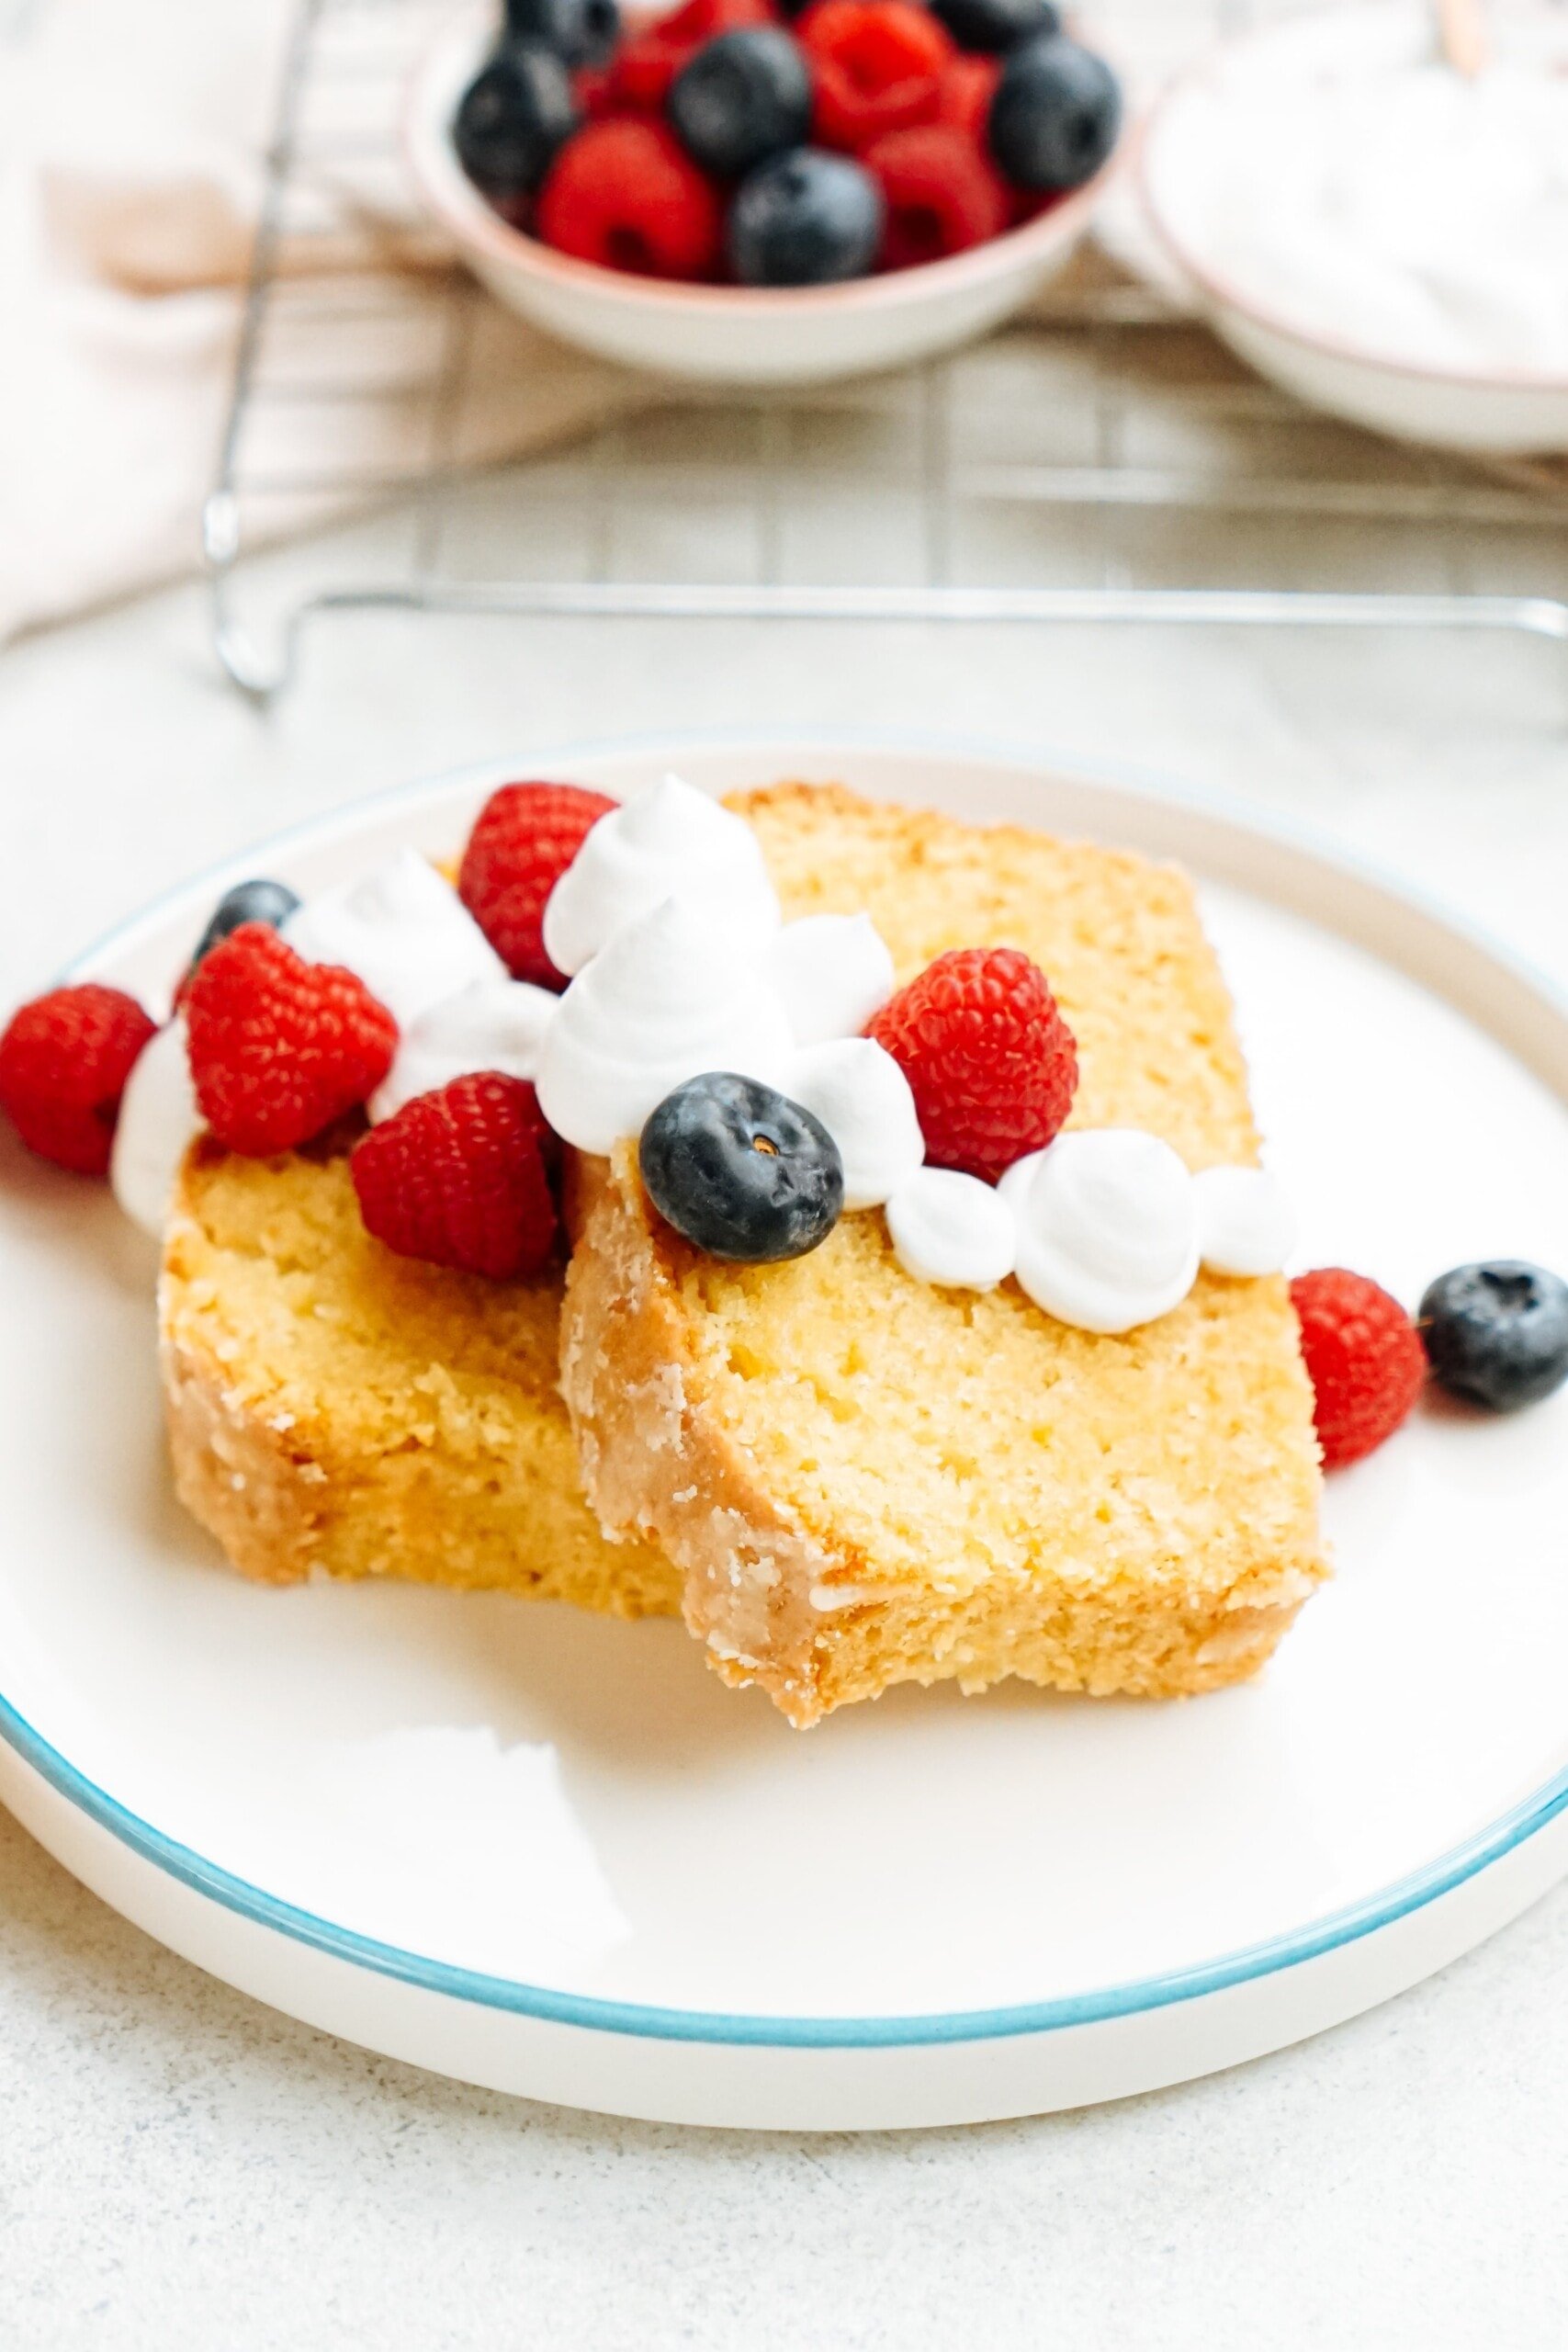 lemon pound cake slices on a plate with whipped Cream and berries